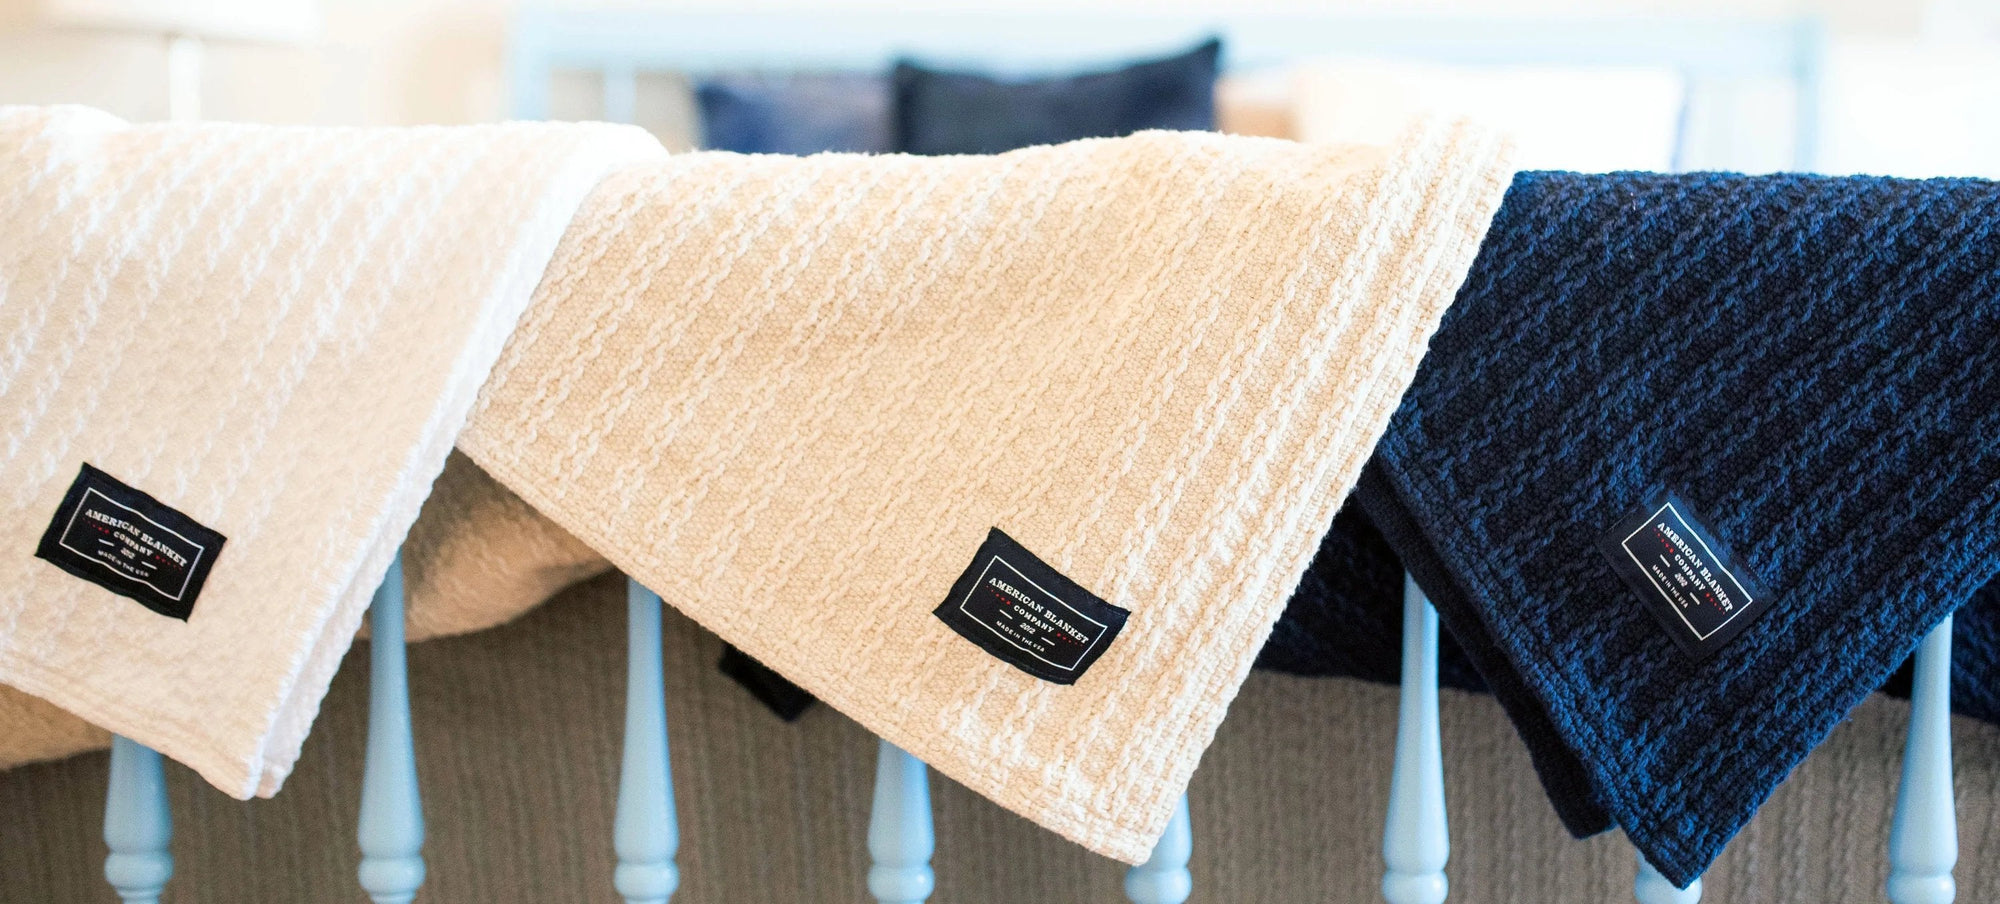 Oversized Woven Cotton Blankets